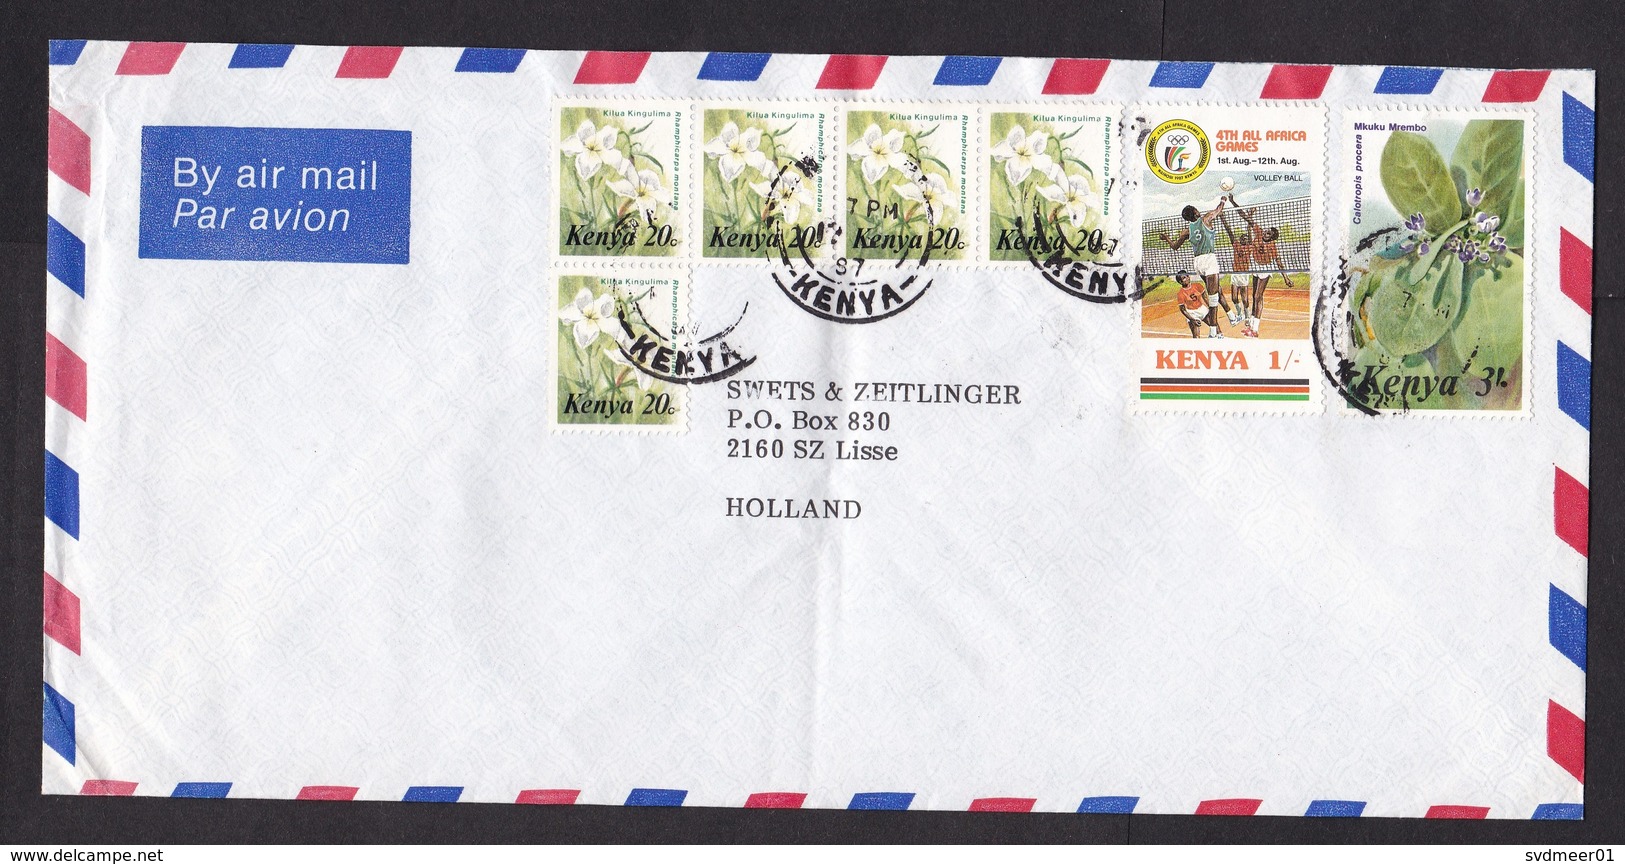 Kenya: Airmail Cover To Netherlands, 1997, 7 Stamps, Volleyball, Africa Games, Ball Sports, Flowers (minor Crease) - Kenia (1963-...)